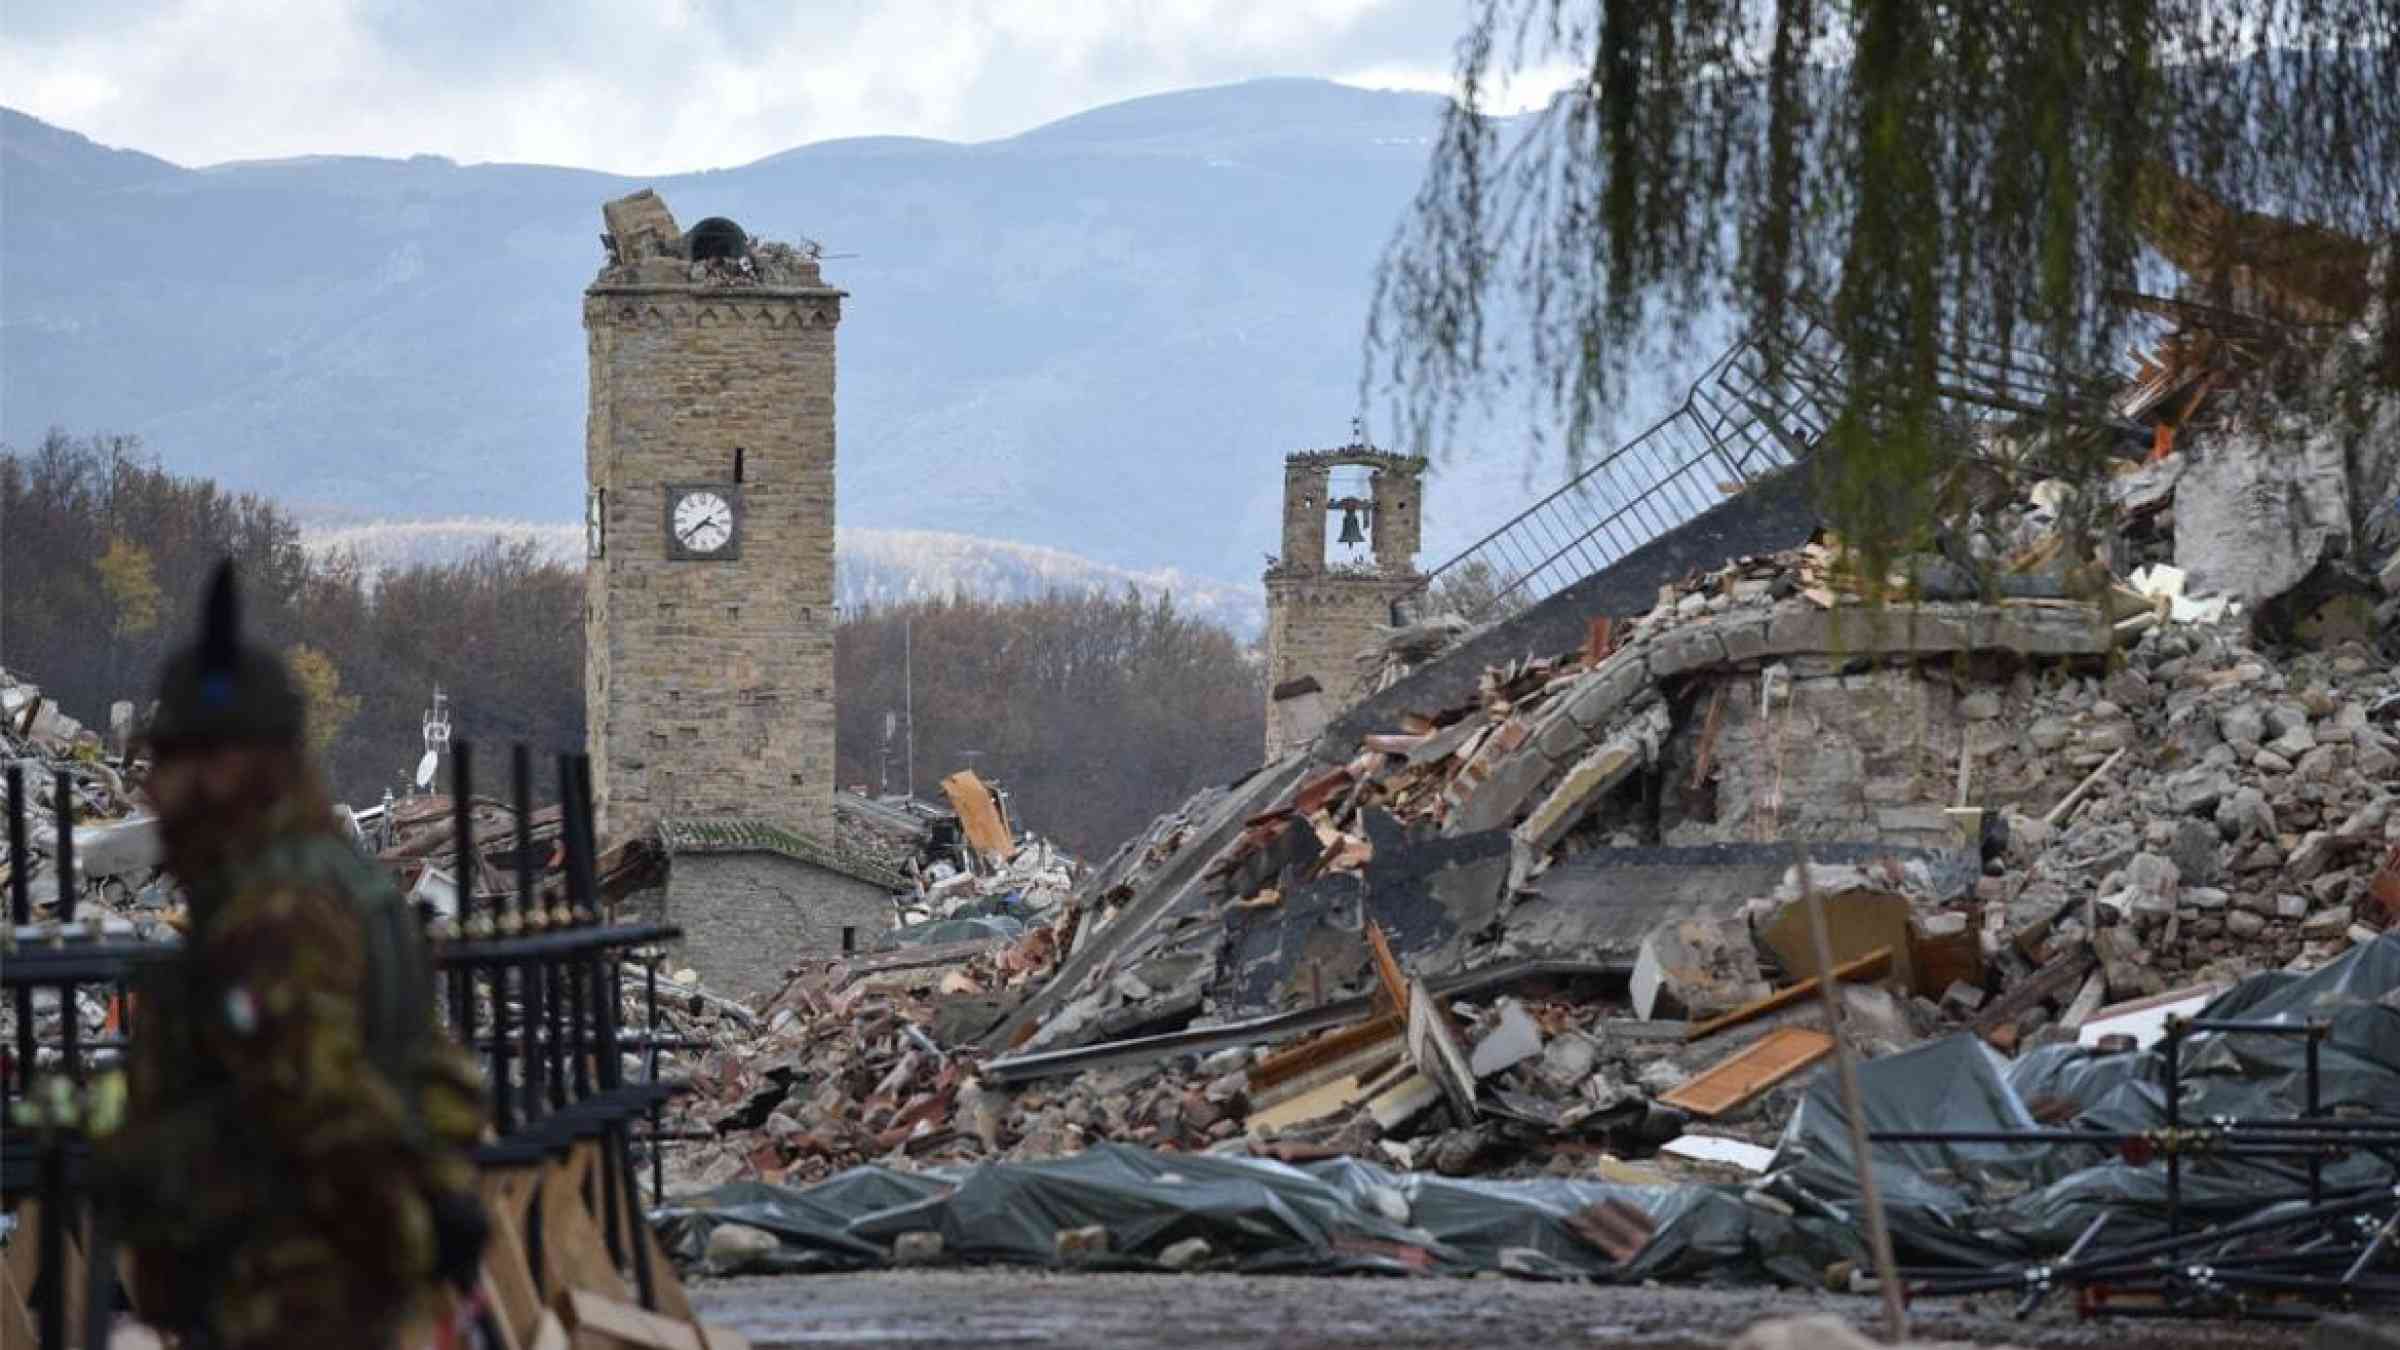 Ruins after the earthquake in Amatrice